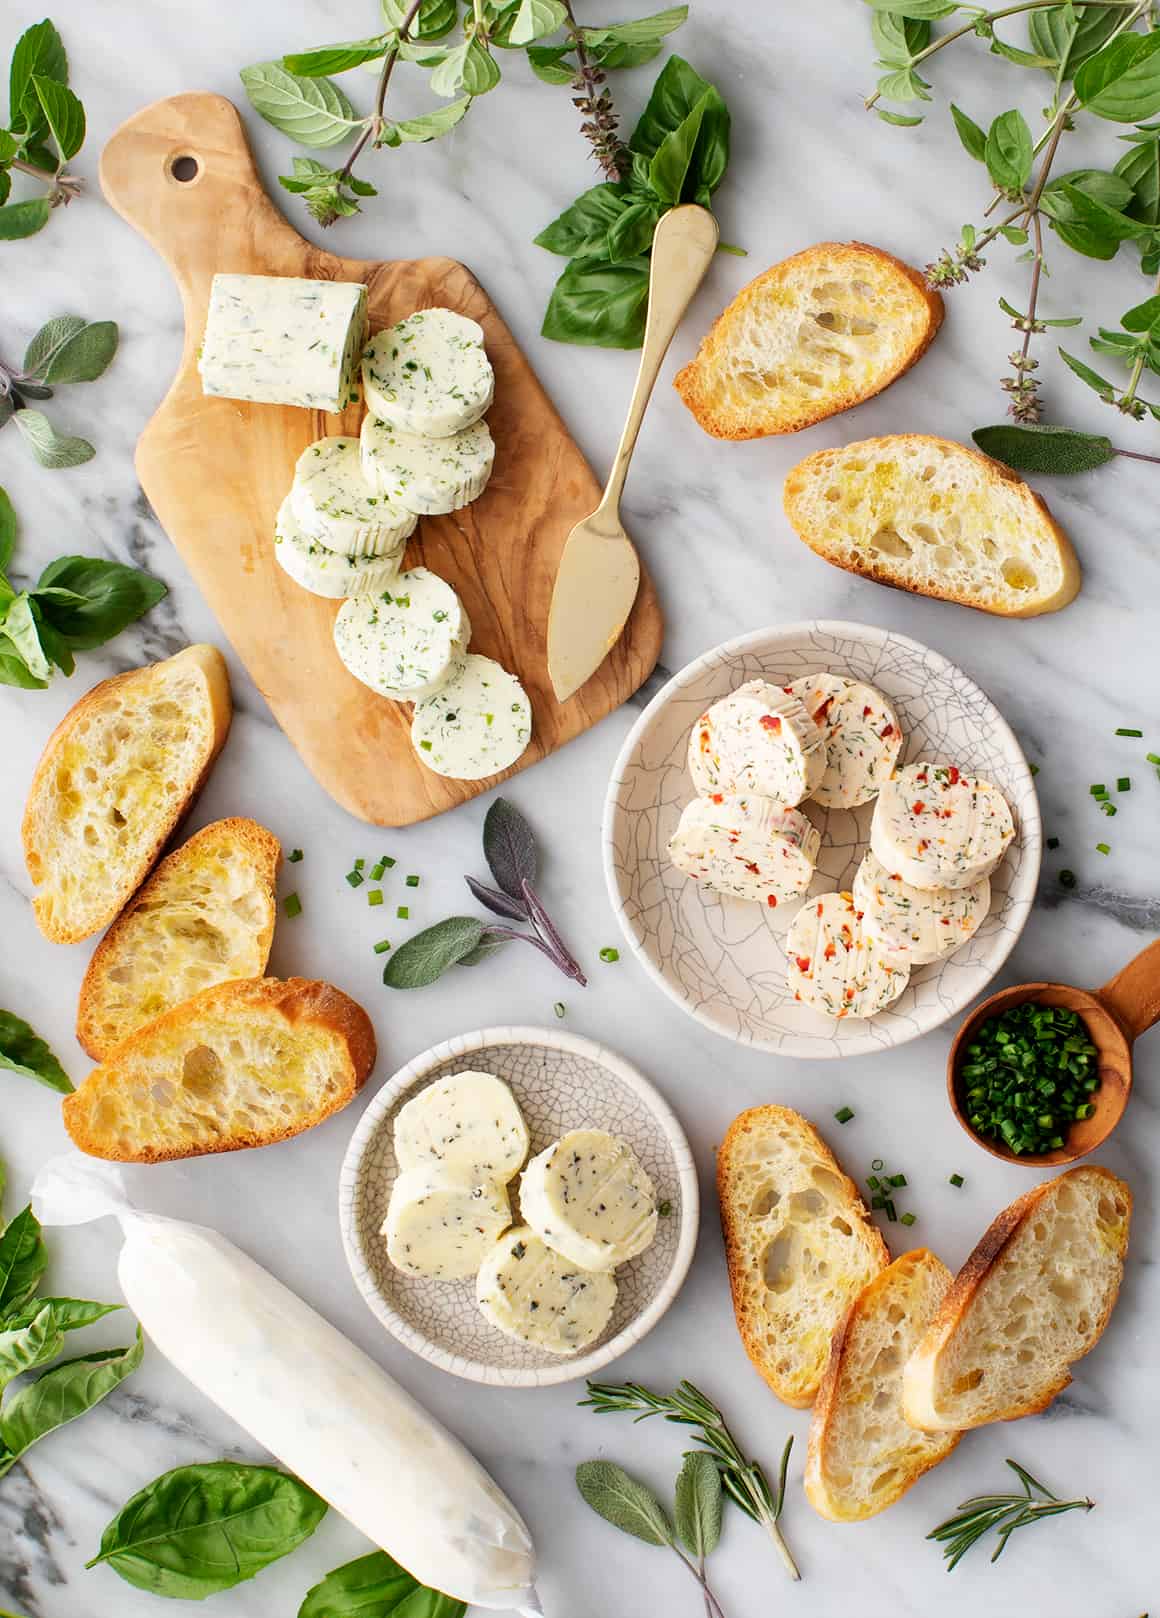 Herb compound butter recipes